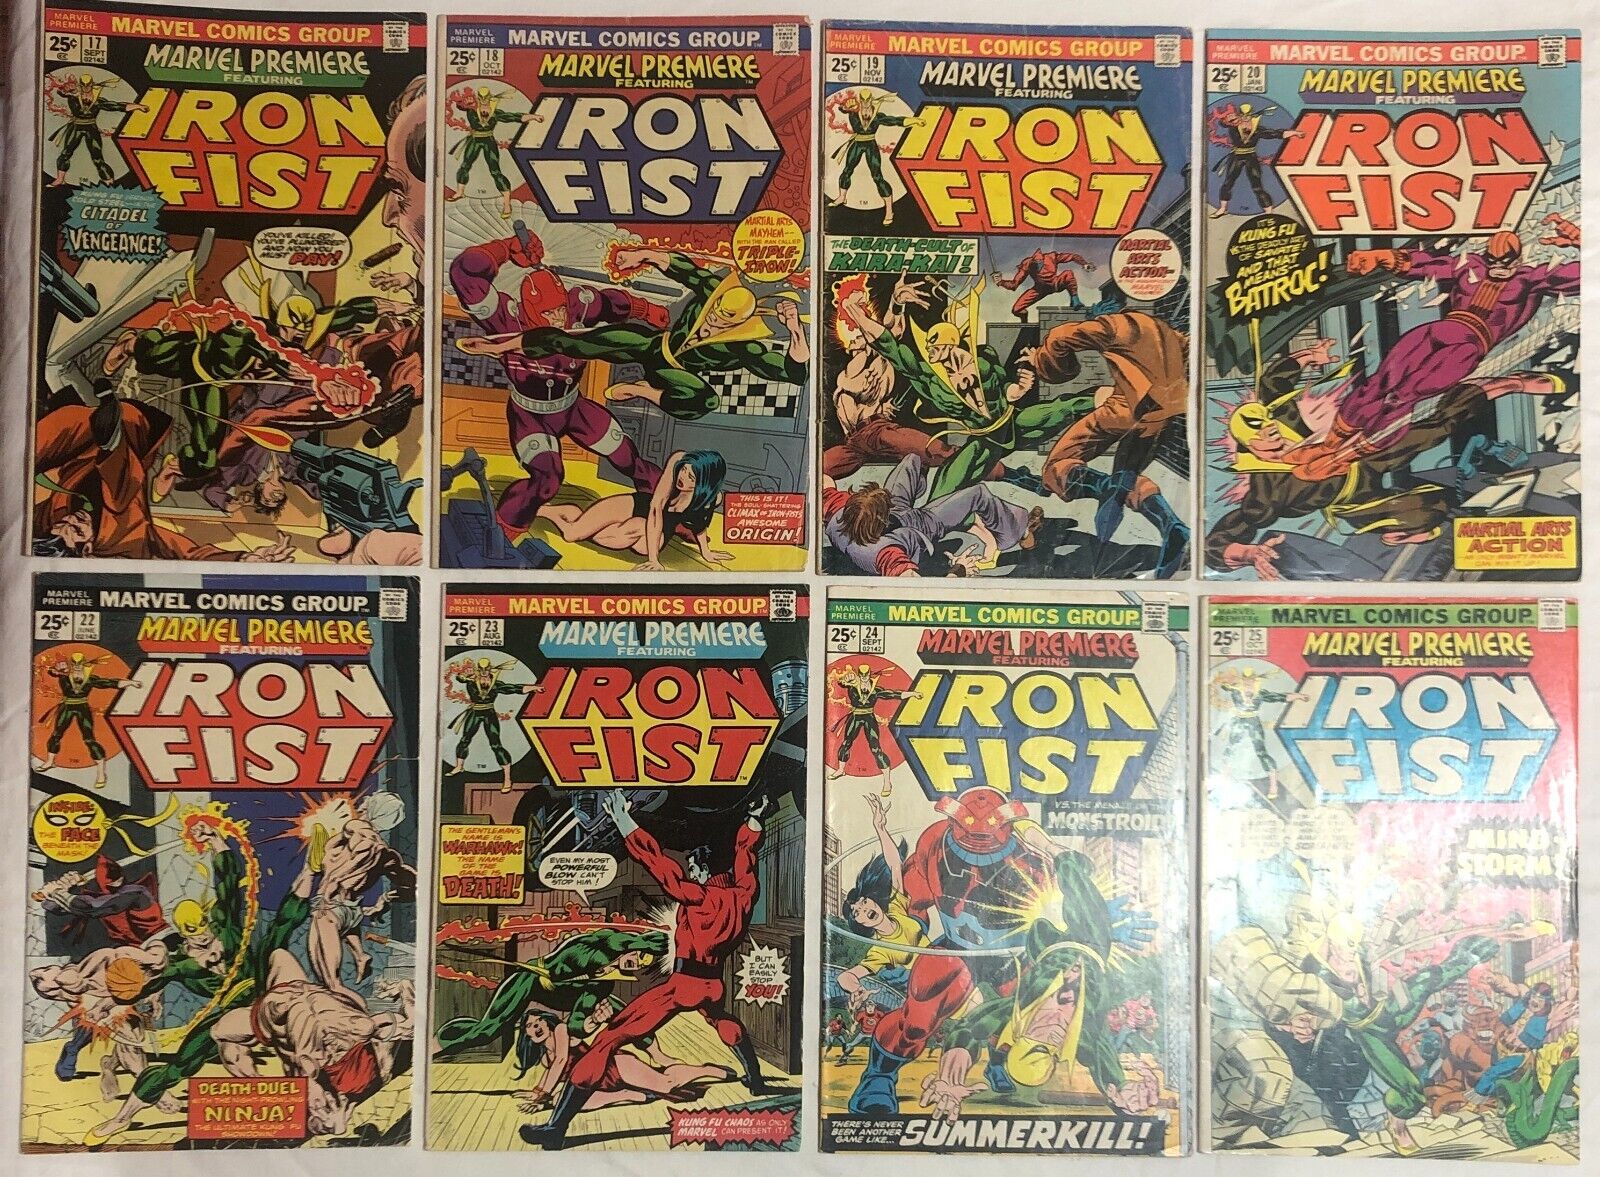 Marvel Premiere Featuring Iron Fist Lot Issues: 17, 18, 19, 20, 22, 23, 24, 25